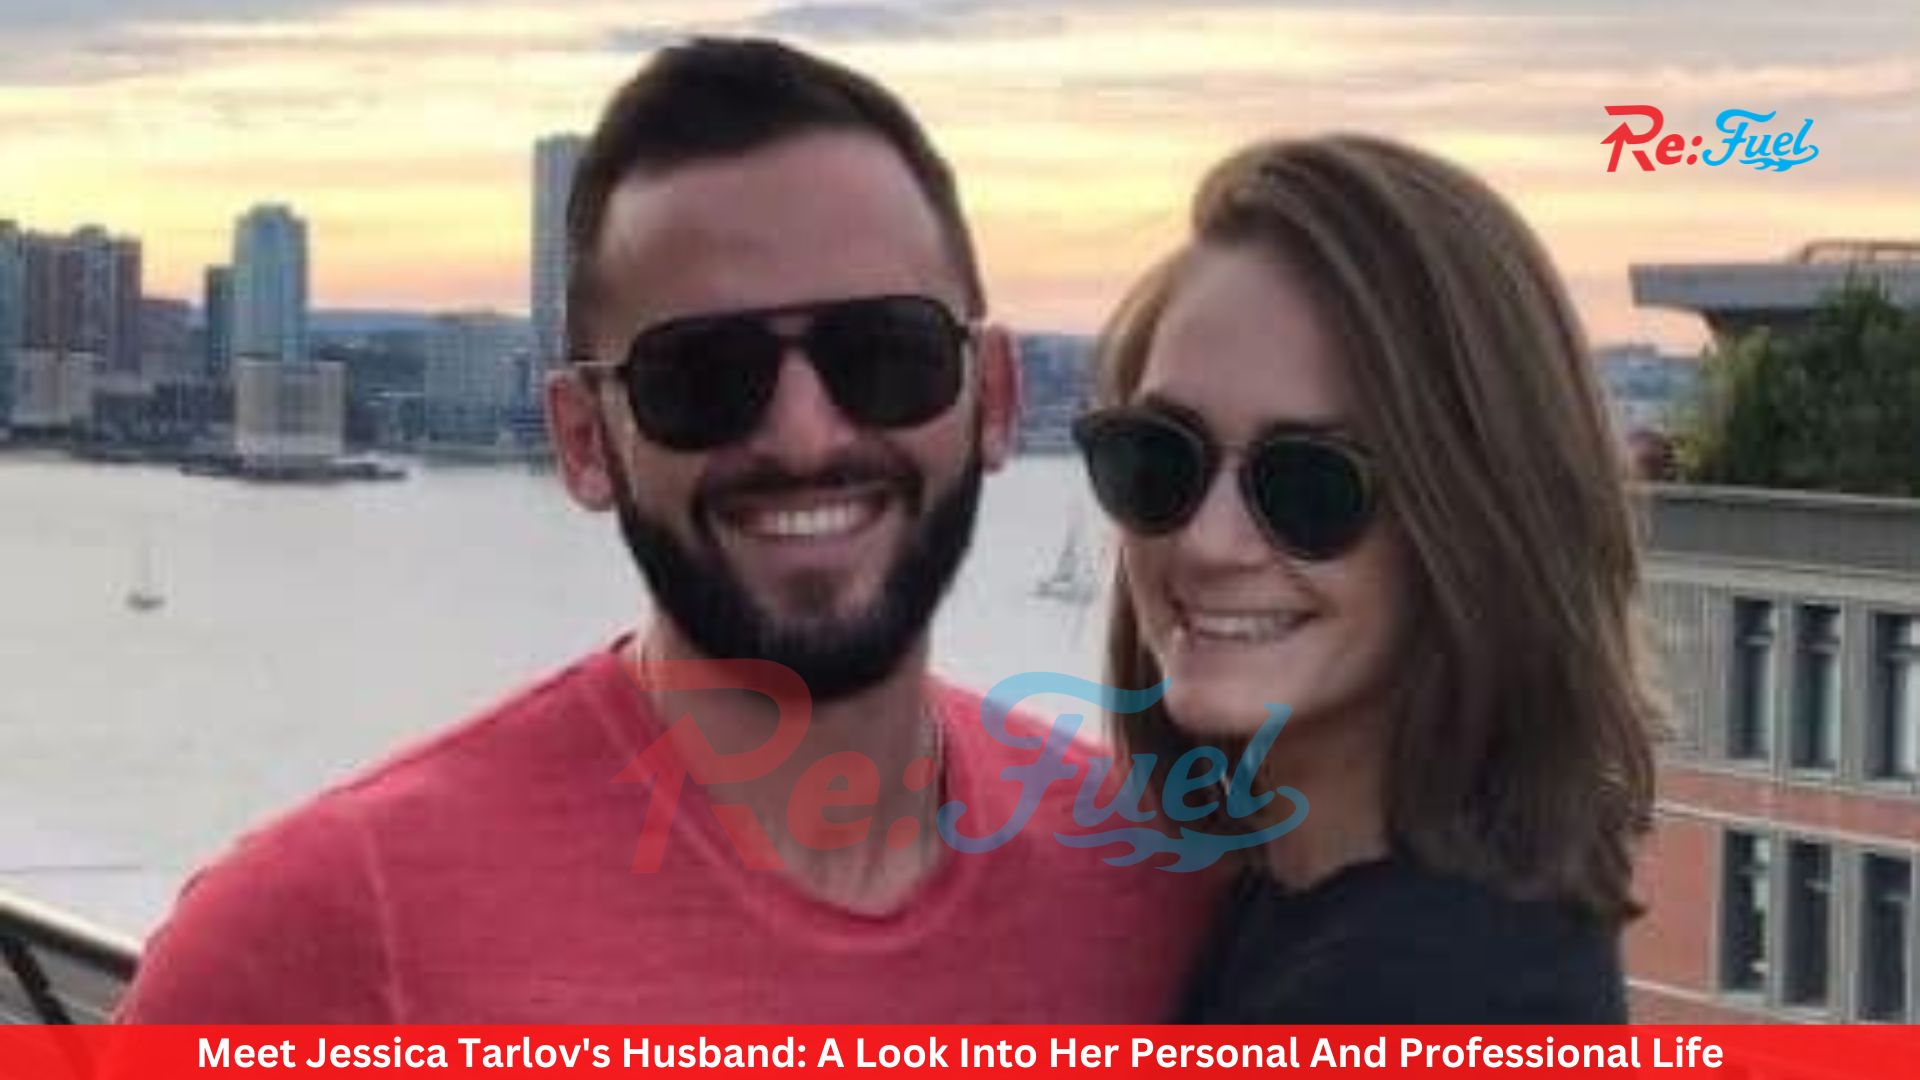 Meet Jessica Tarlov's Husband: A Look Into Her Personal And Professional Life